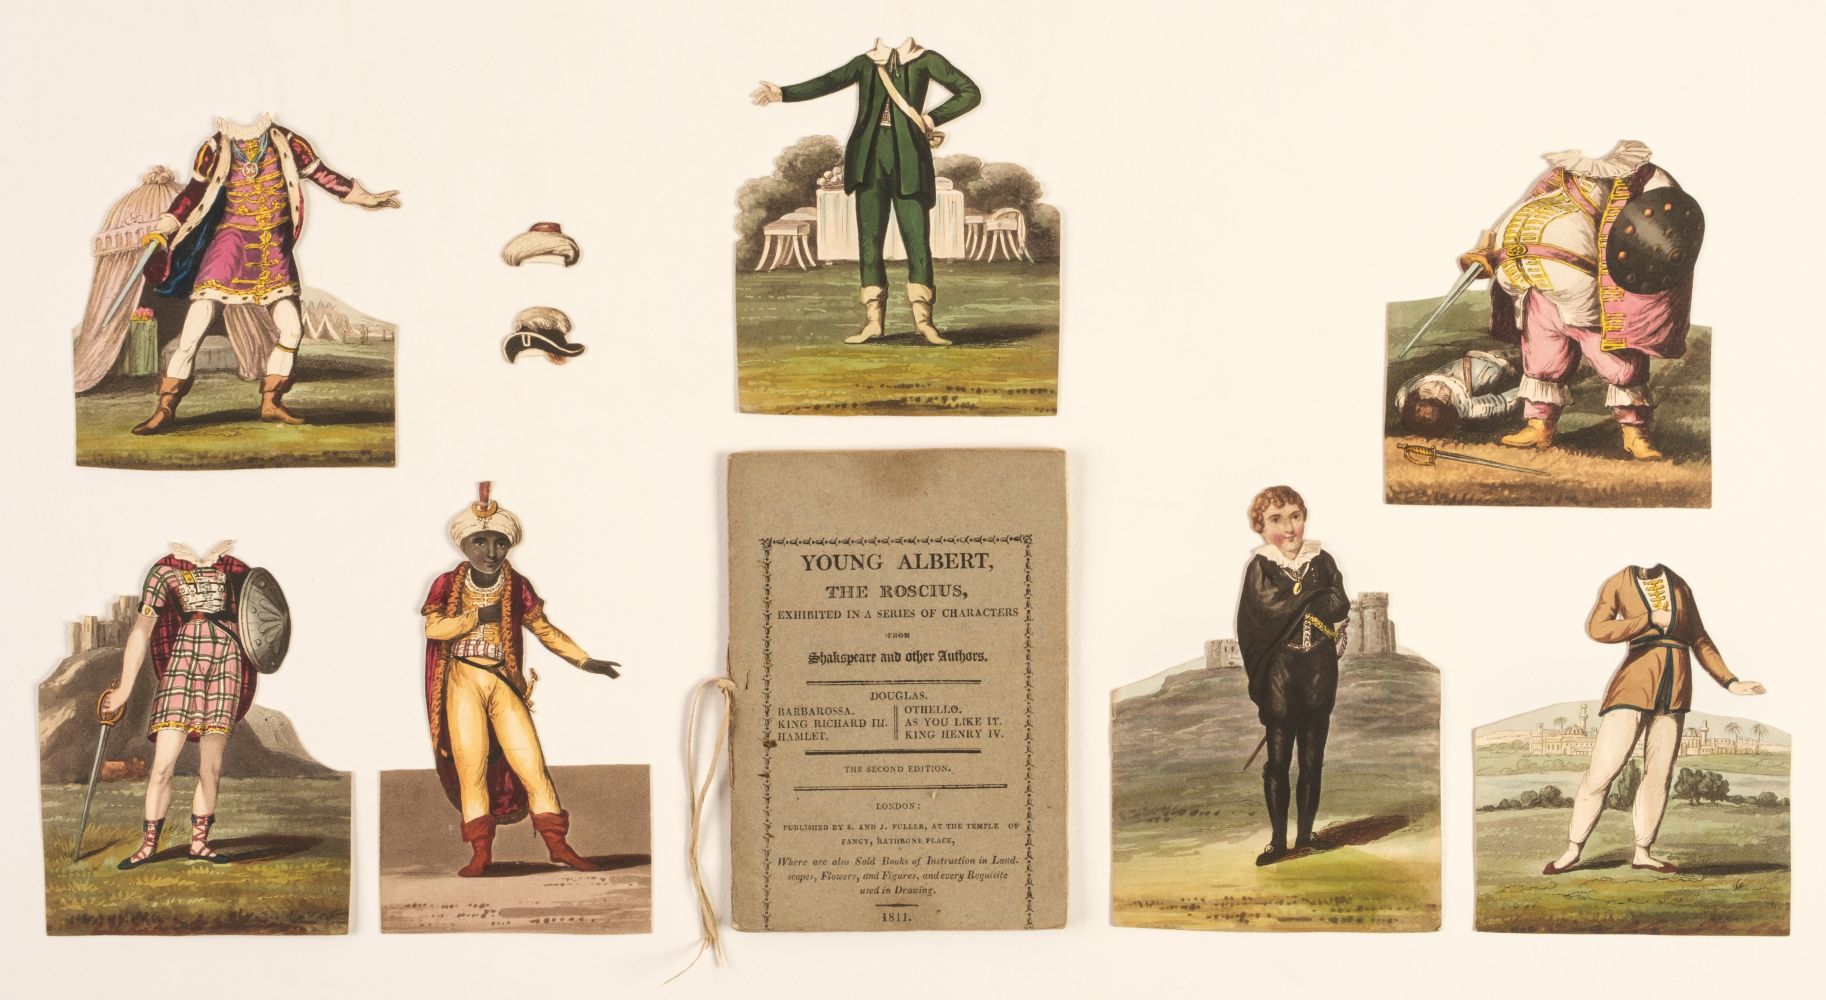 Paper Doll Book. Young Albert, the Roscius, 2nd edition, 1811